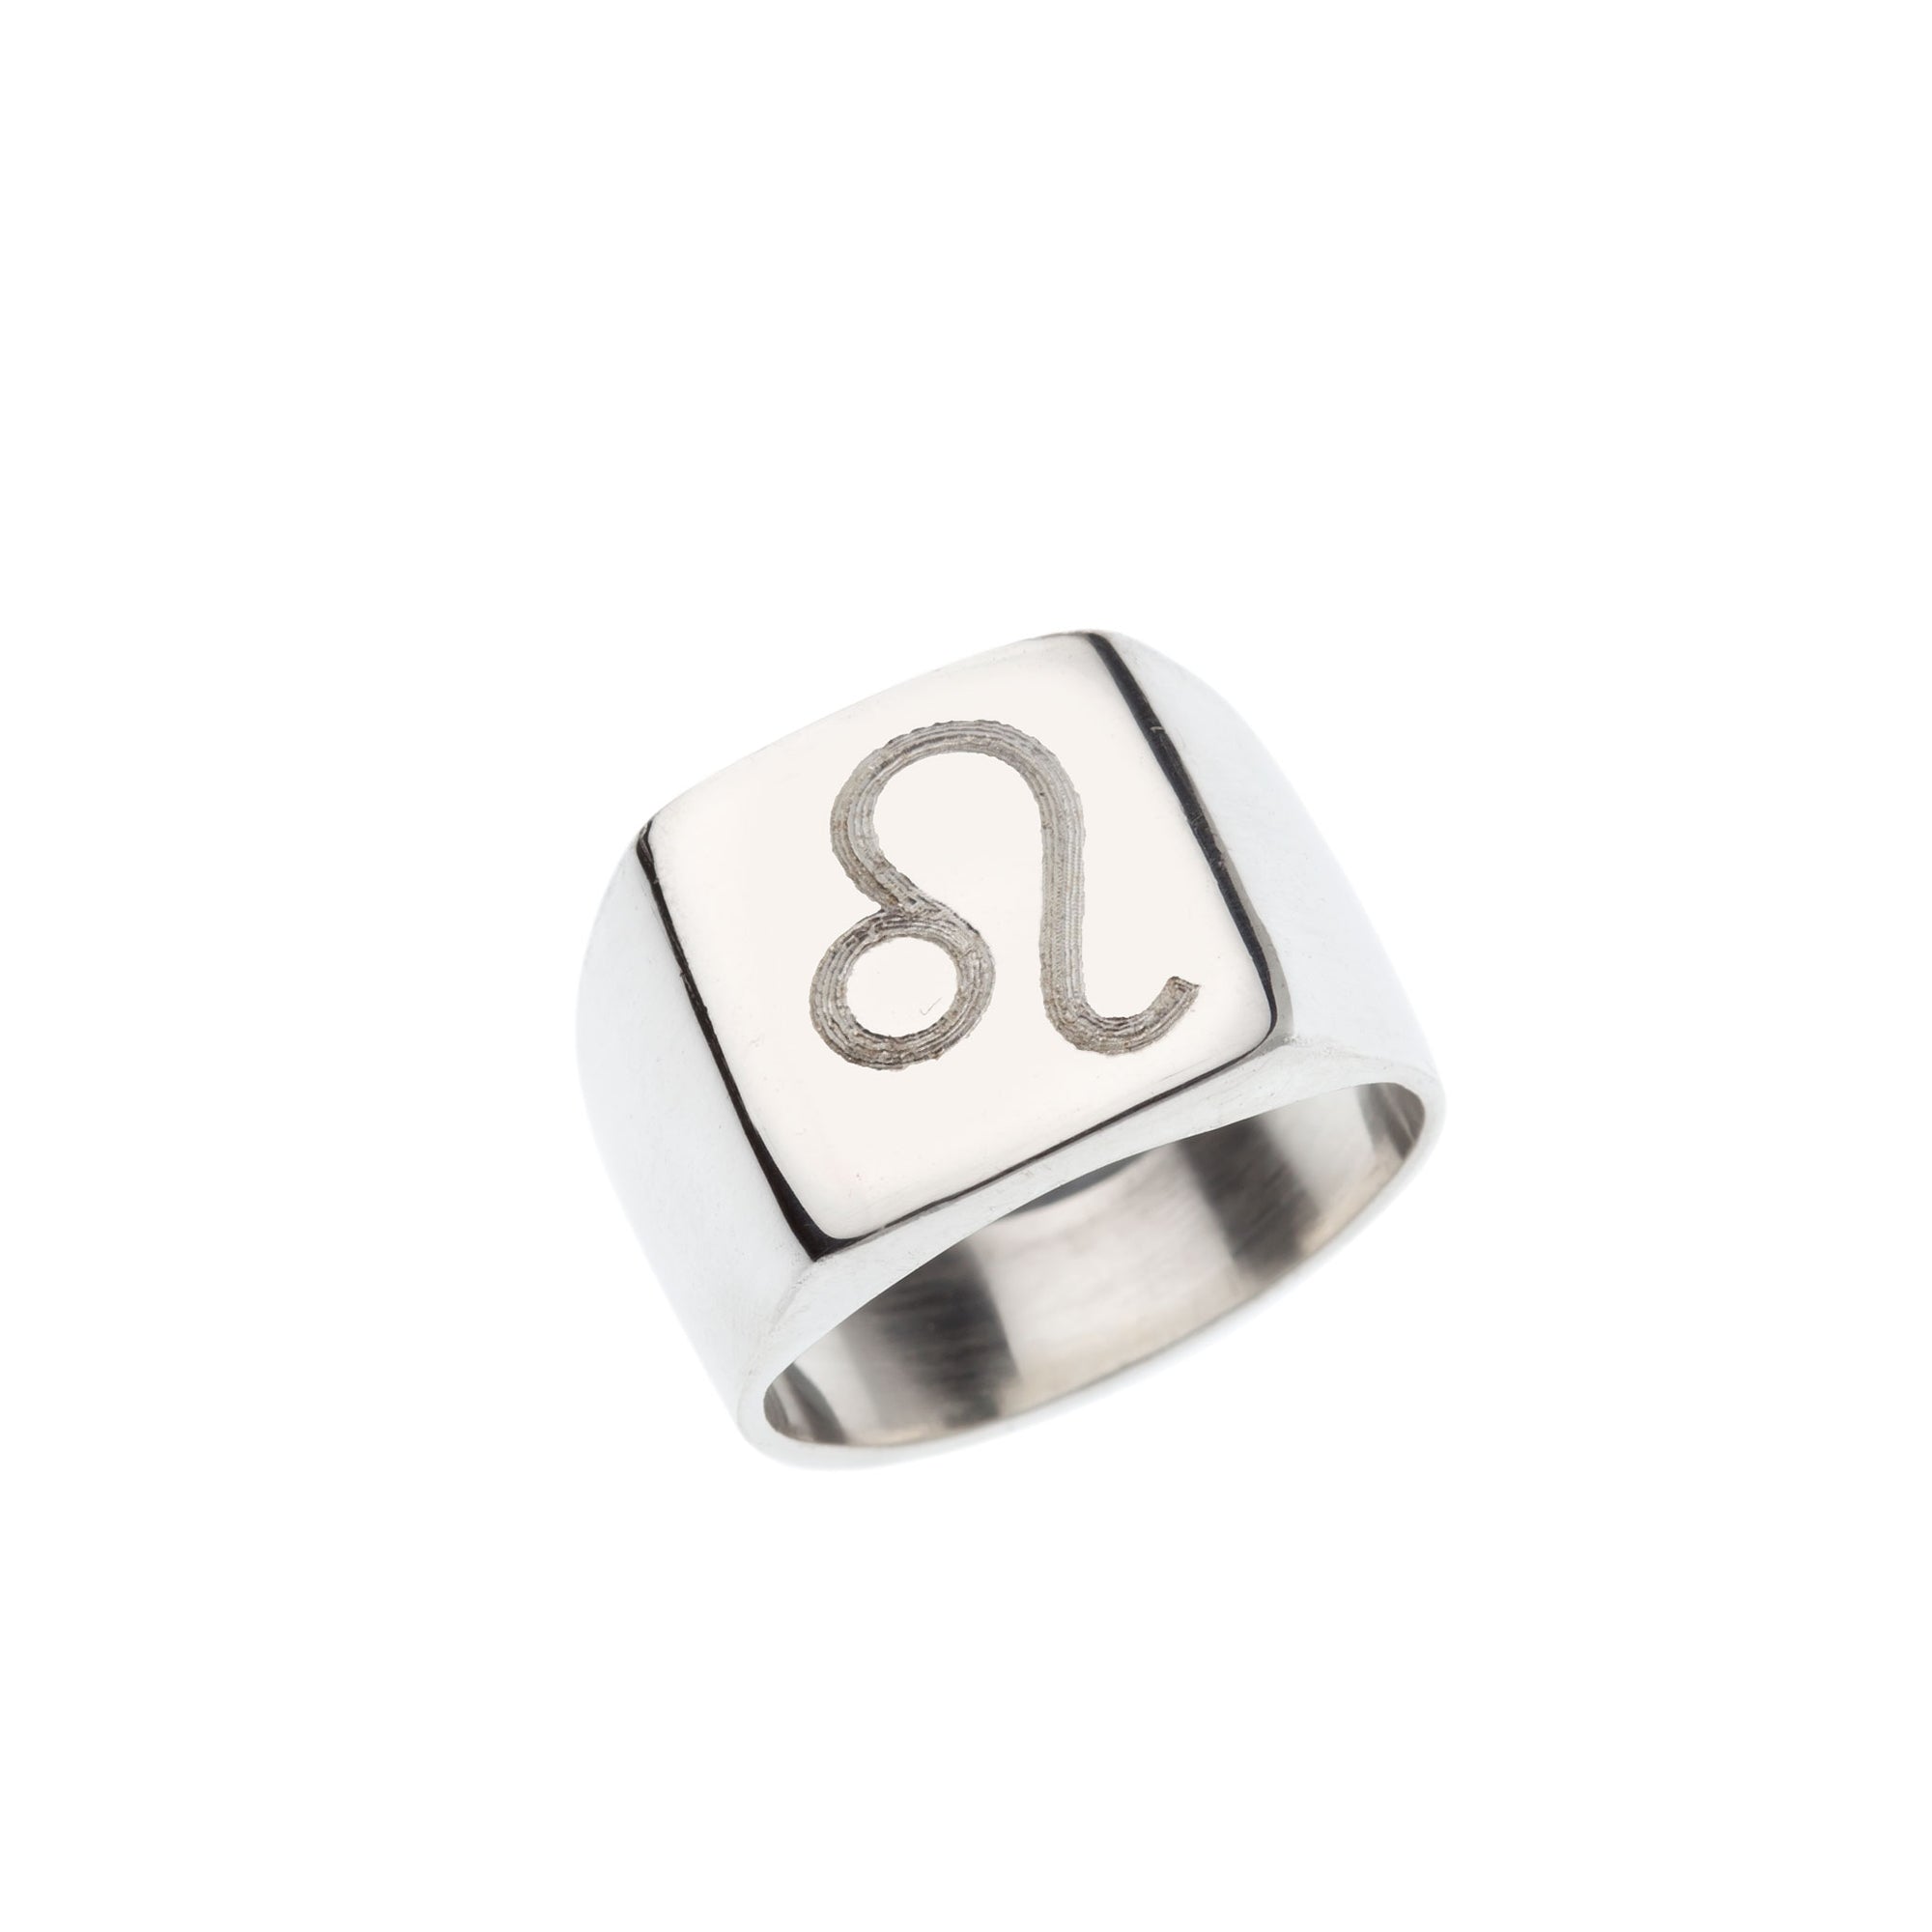 Square silver signet ring with engraved Leo symbol.